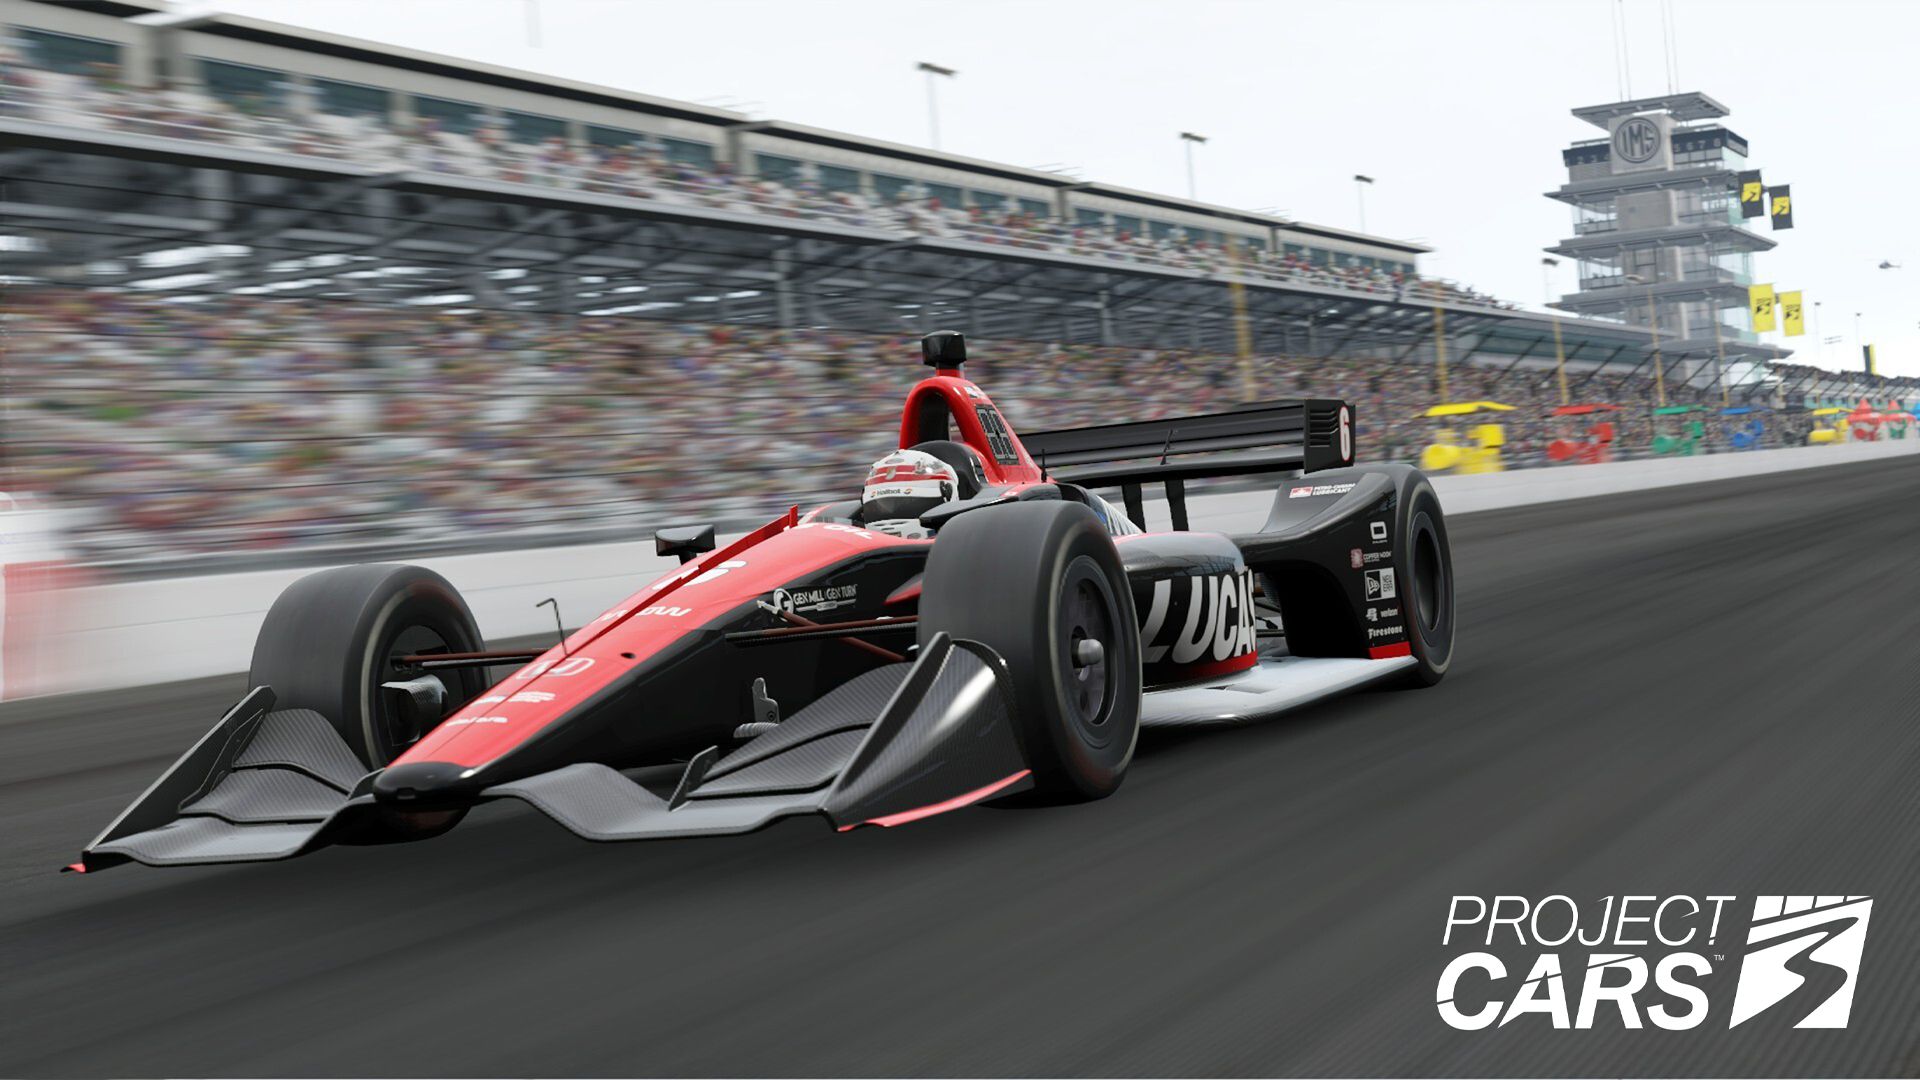 Project Cars 3 to feature Wickens tribute livery